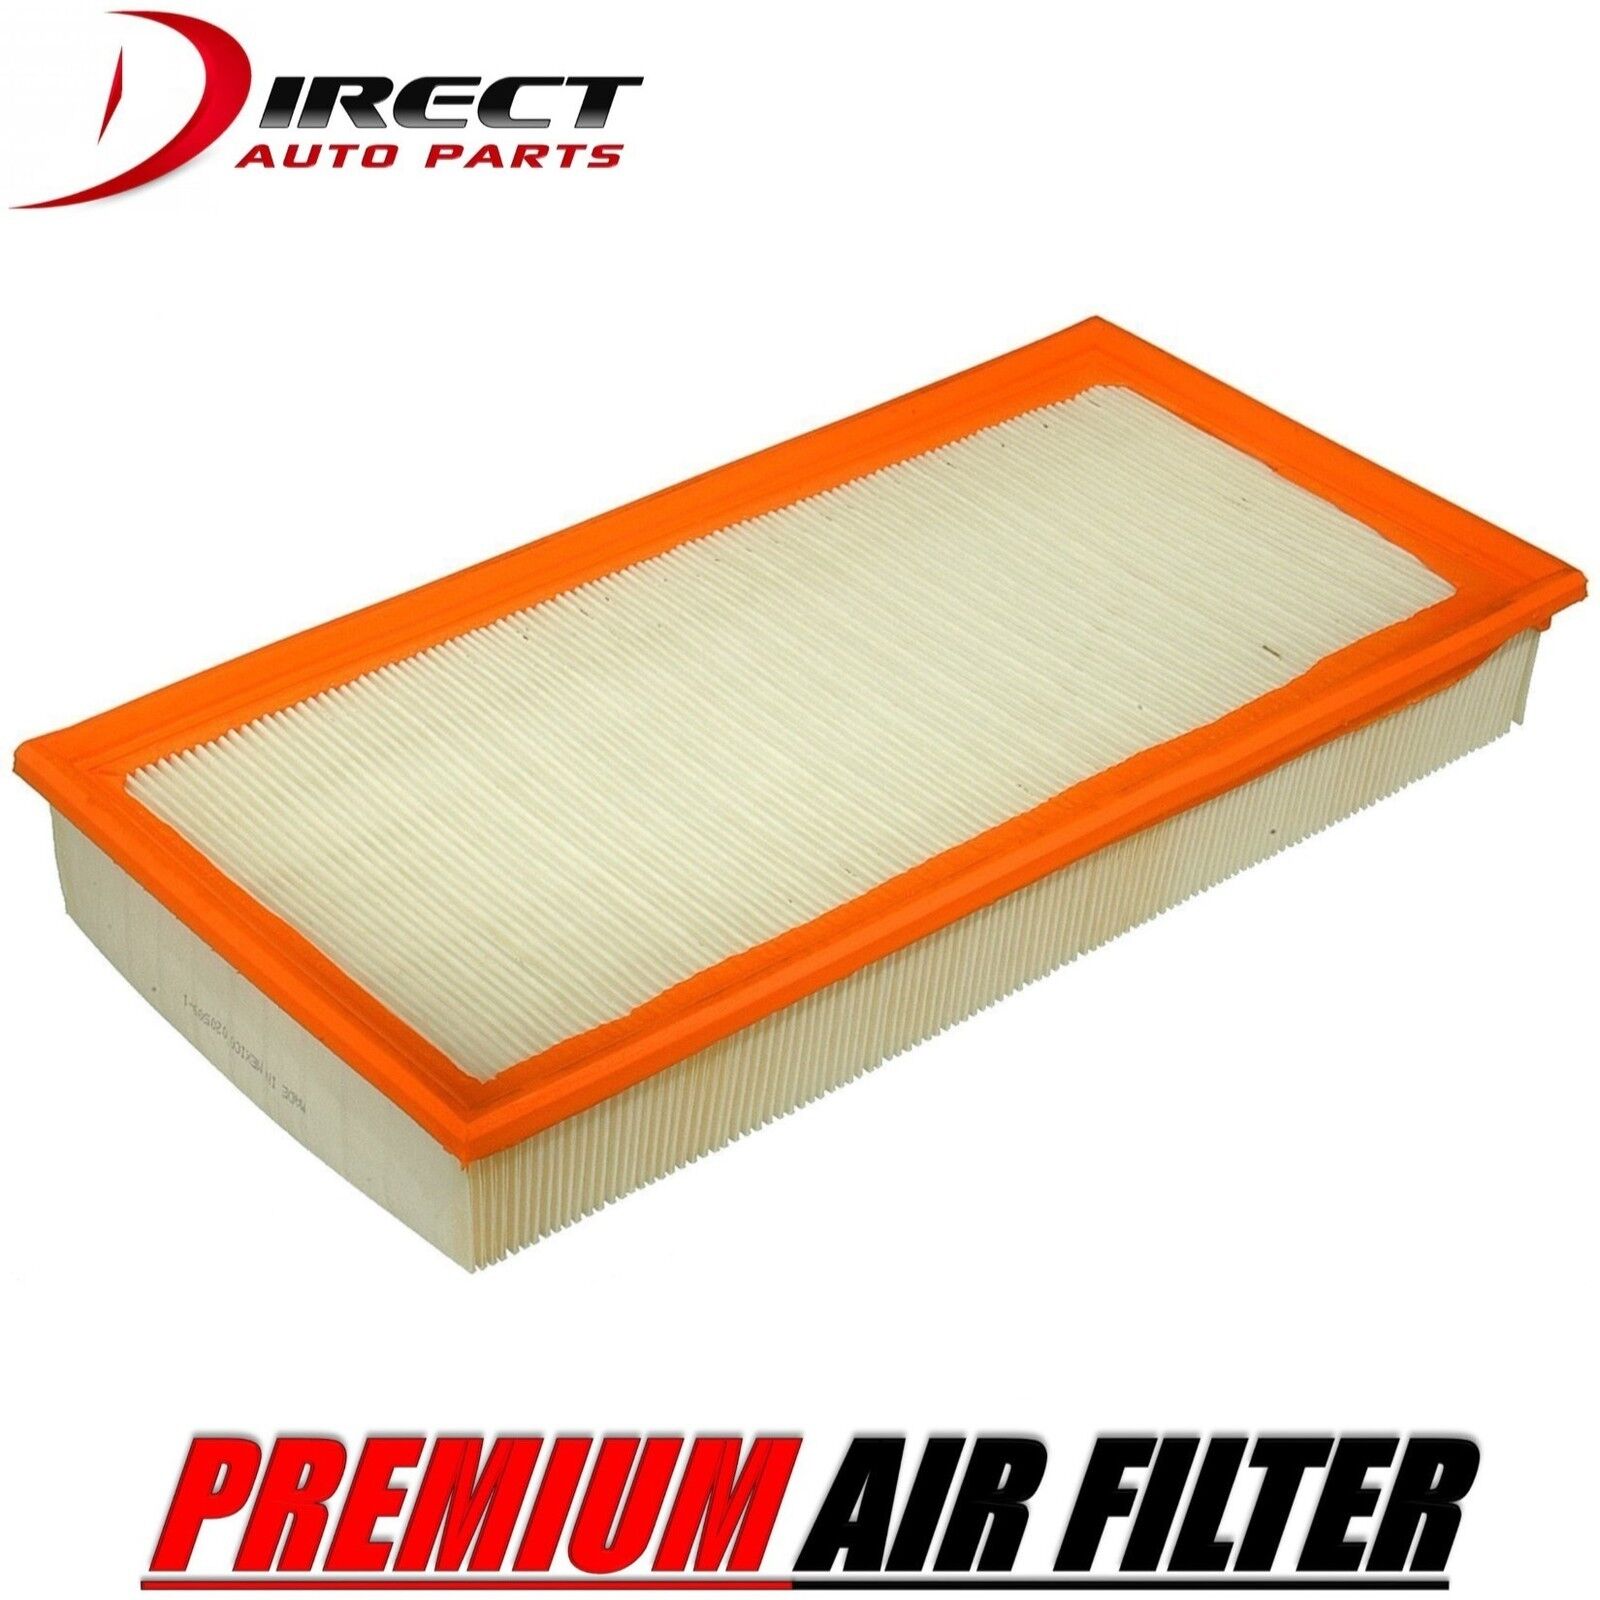 LINCOLN AIR FILTER FOR LINCOLN MKX 3.7L ENGINE 2011 - 2015